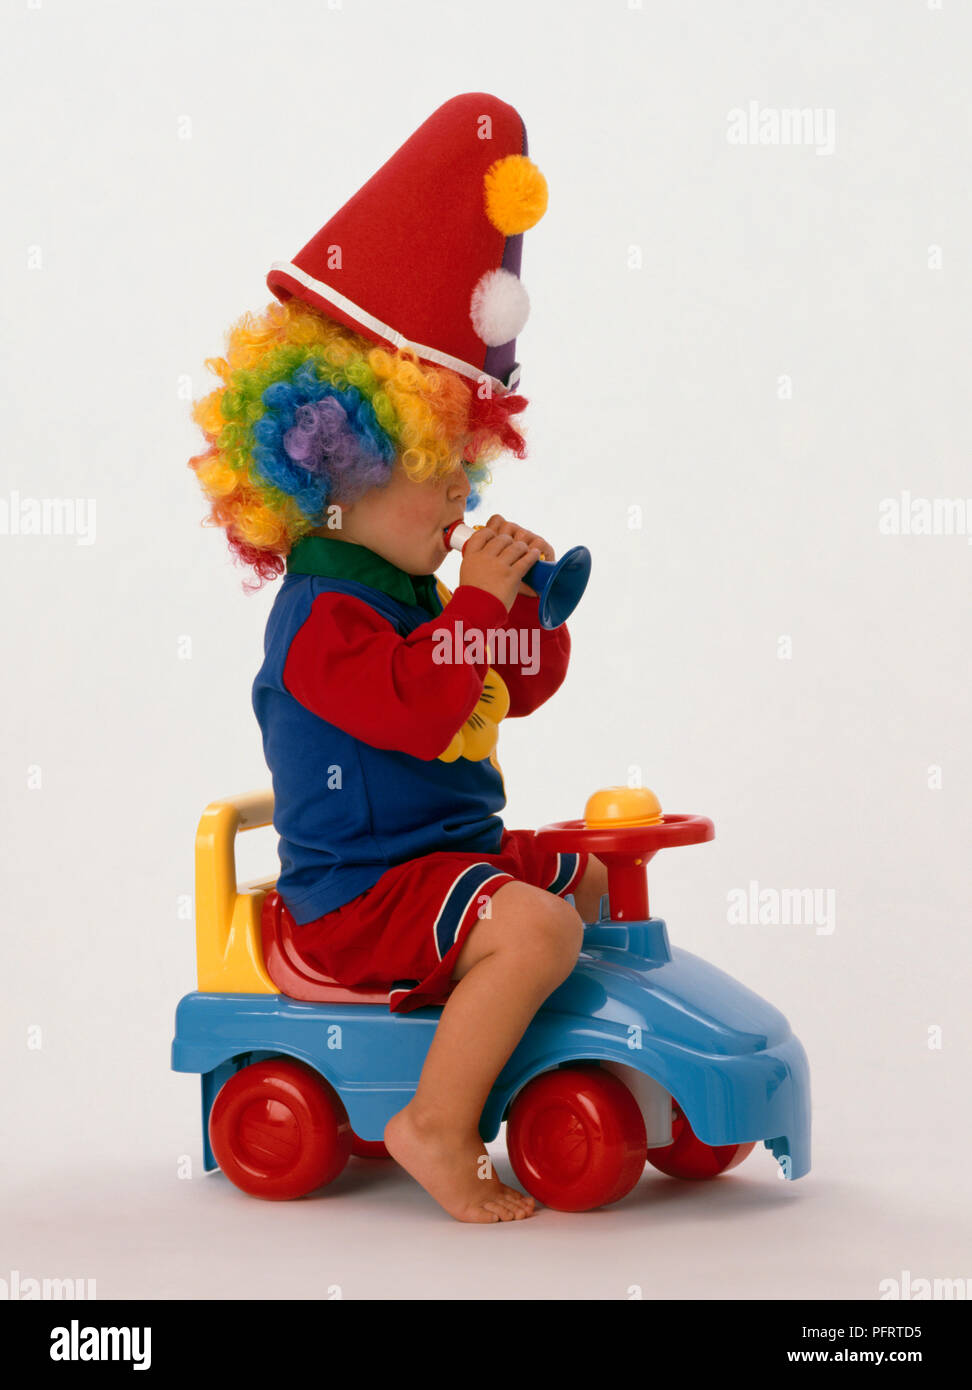 Toddler wearing clown hat and multi coloured wig sitting on toy car and blowing toy trumpet Stock Photo